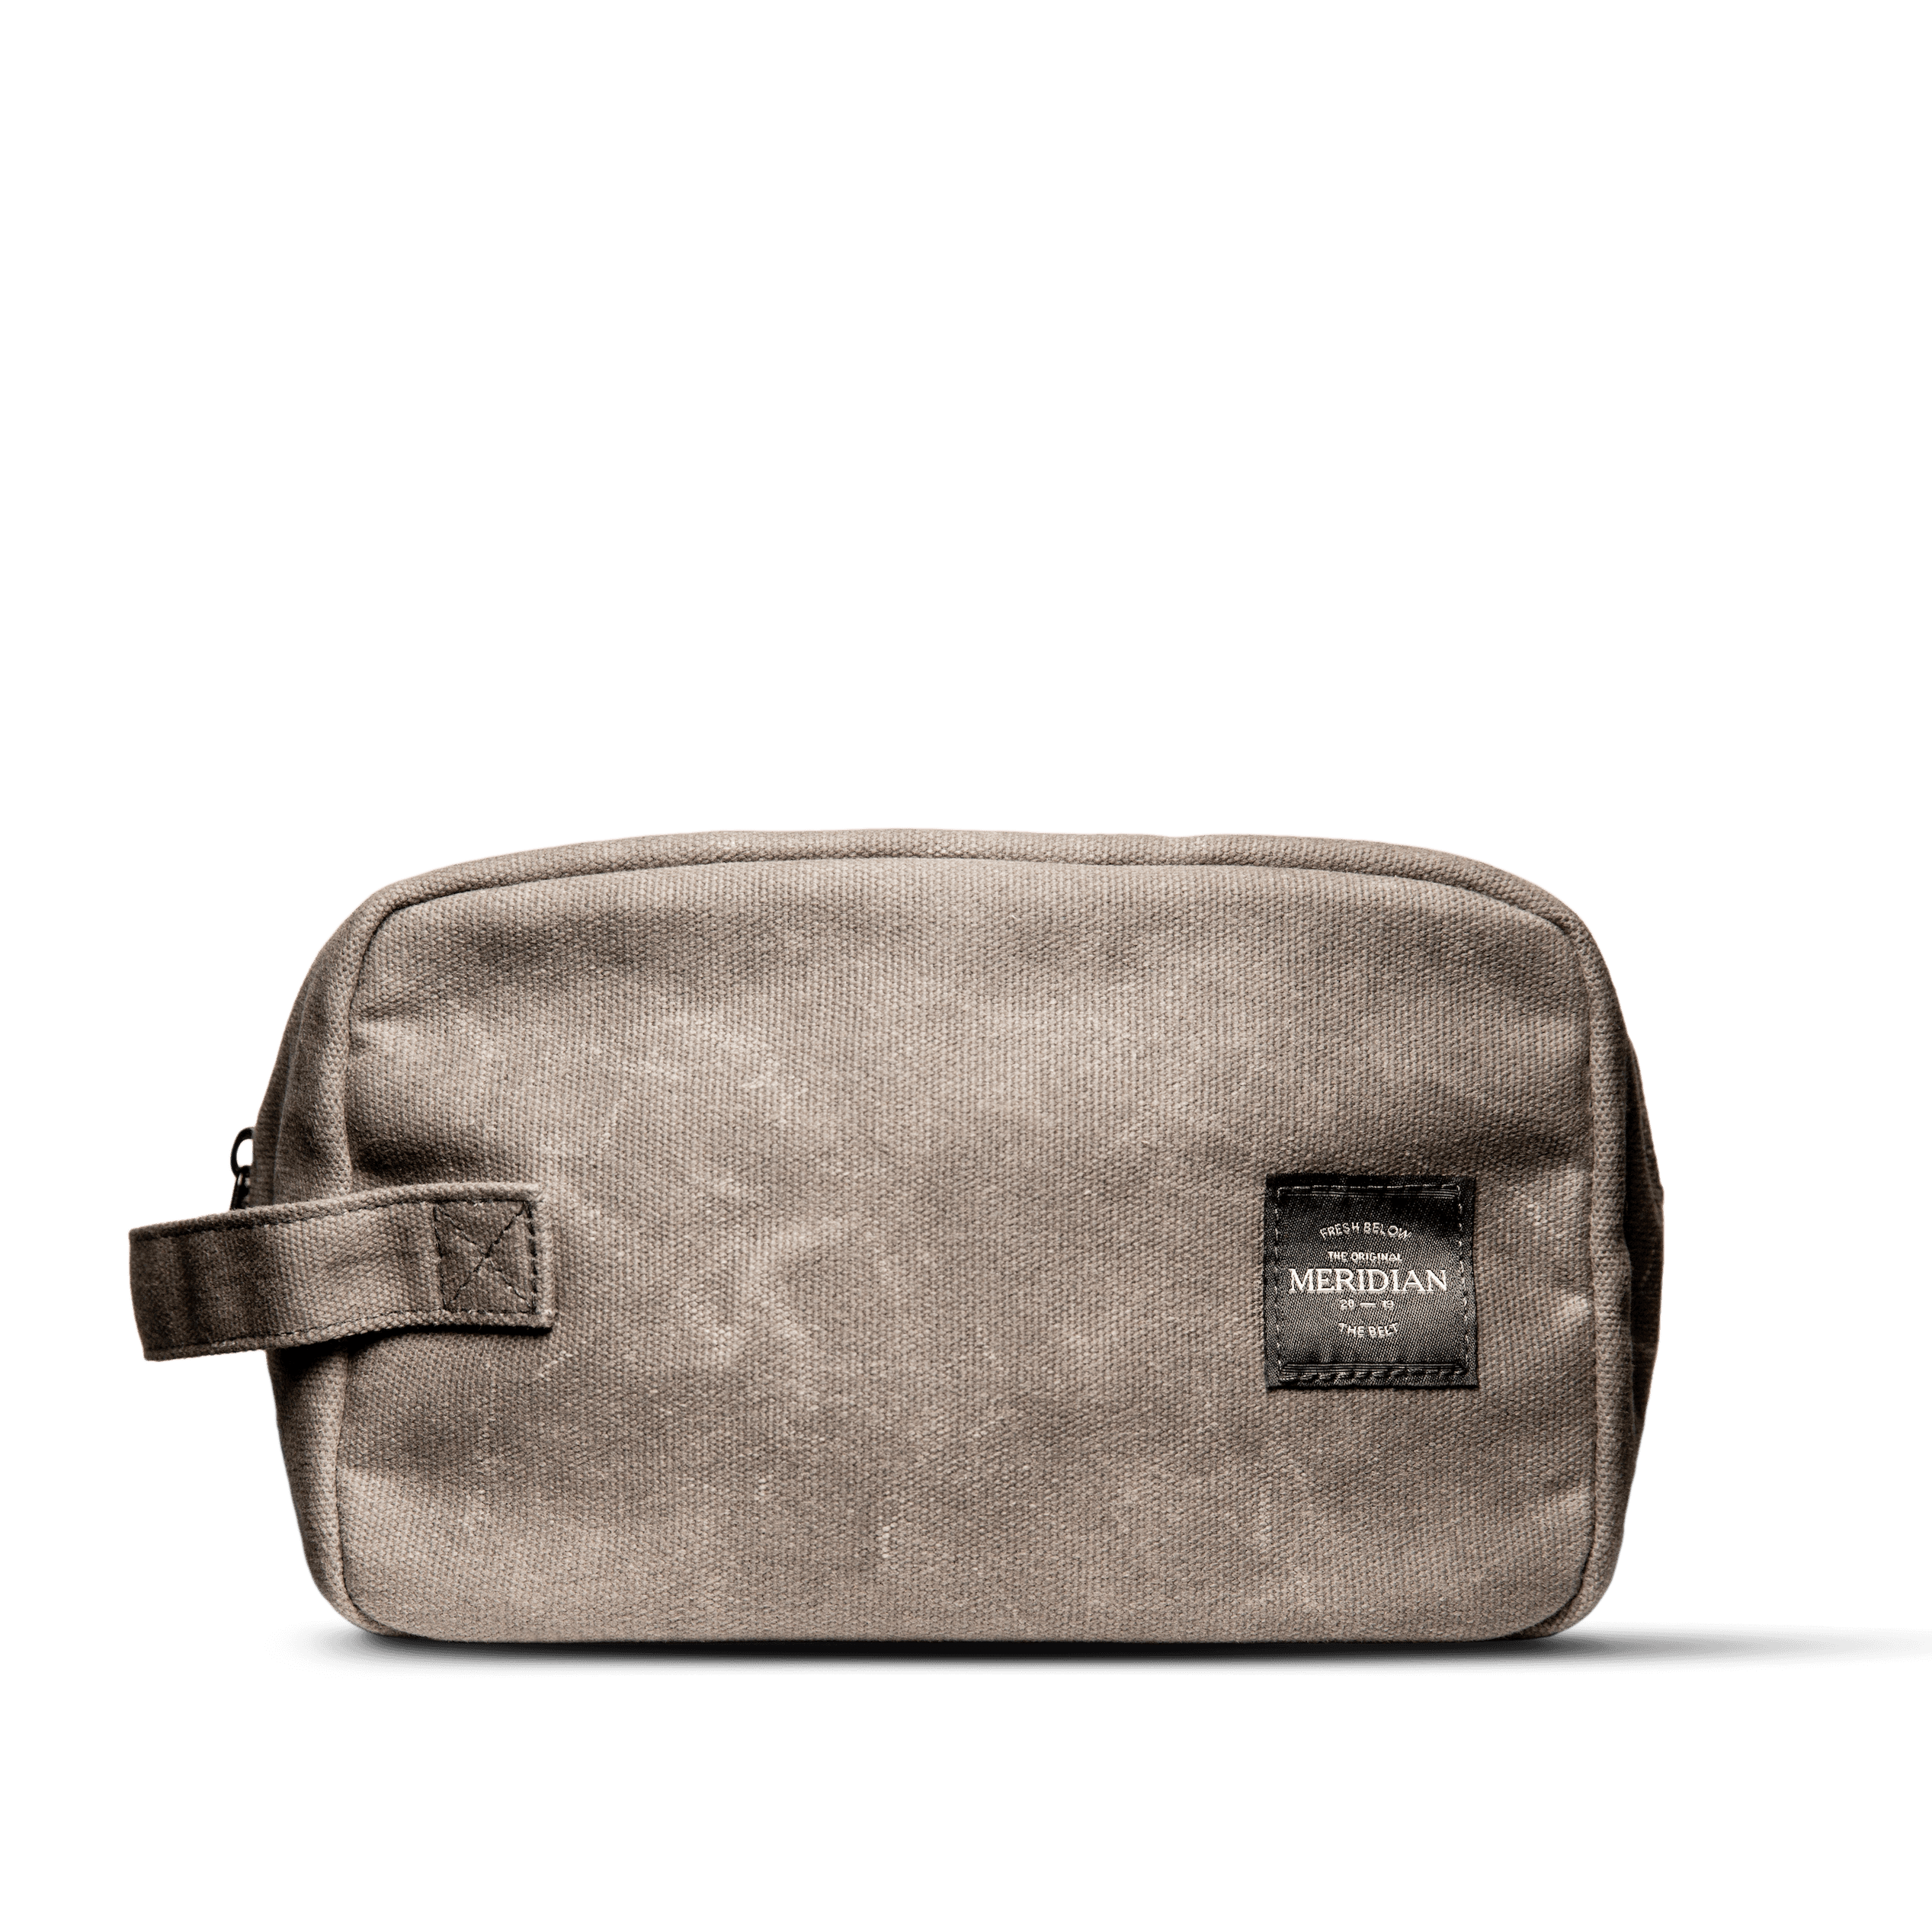 Meridian Grooming - The To-Go Bag